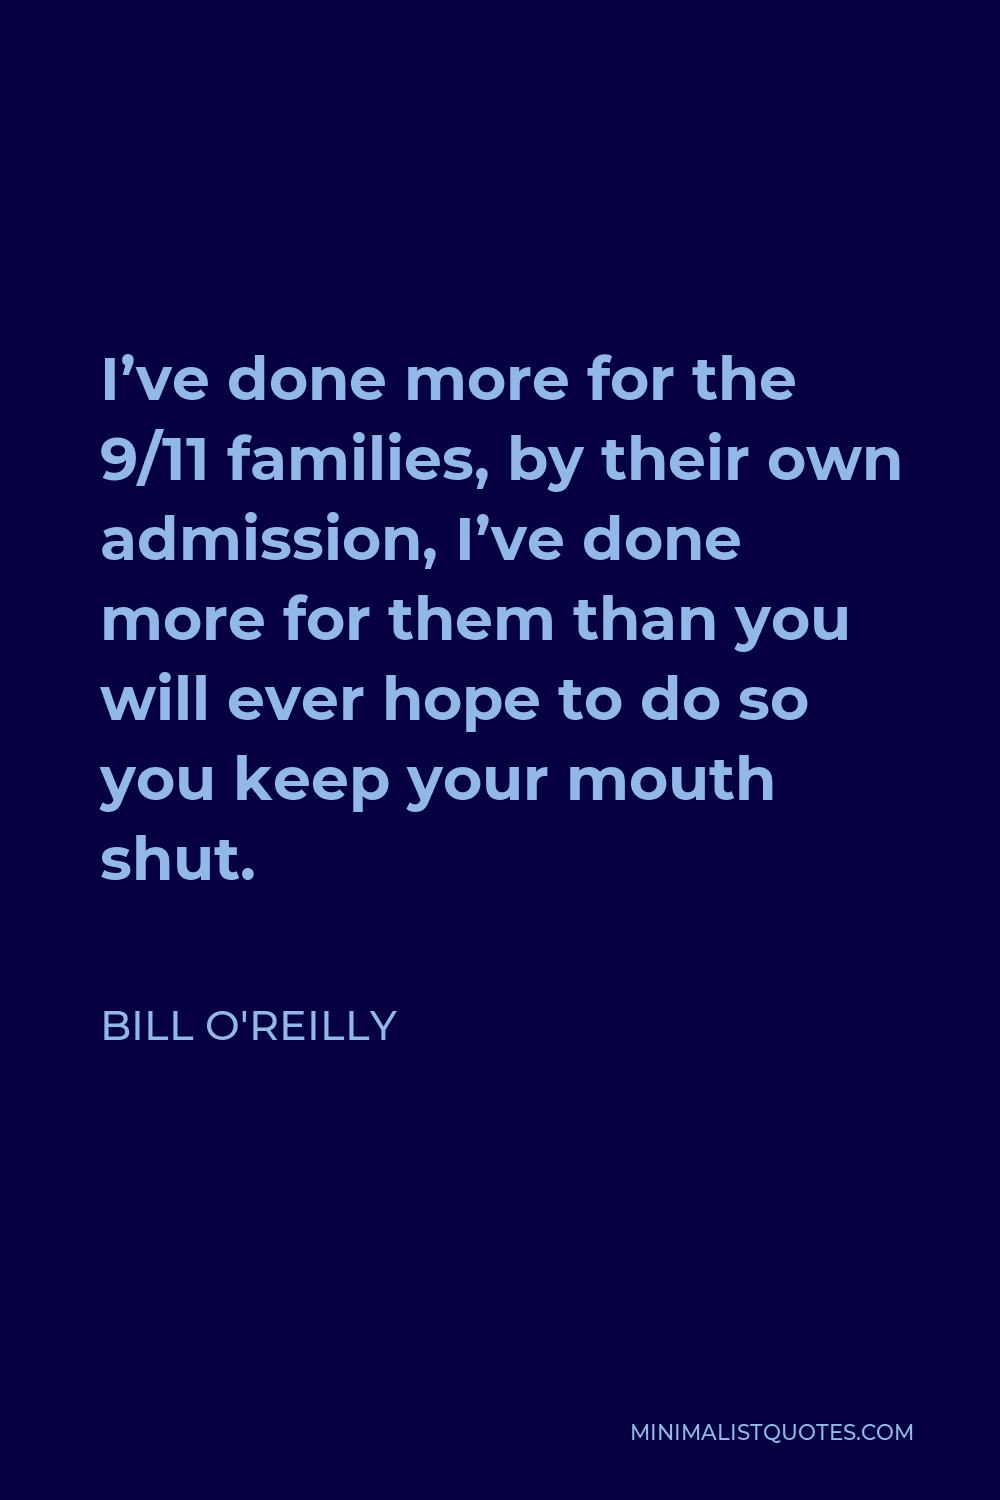 Bill O'Reilly Quote - I’ve done more for the 9/11 families, by their own admission, I’ve done more for them than you will ever hope to do so you keep your mouth shut.